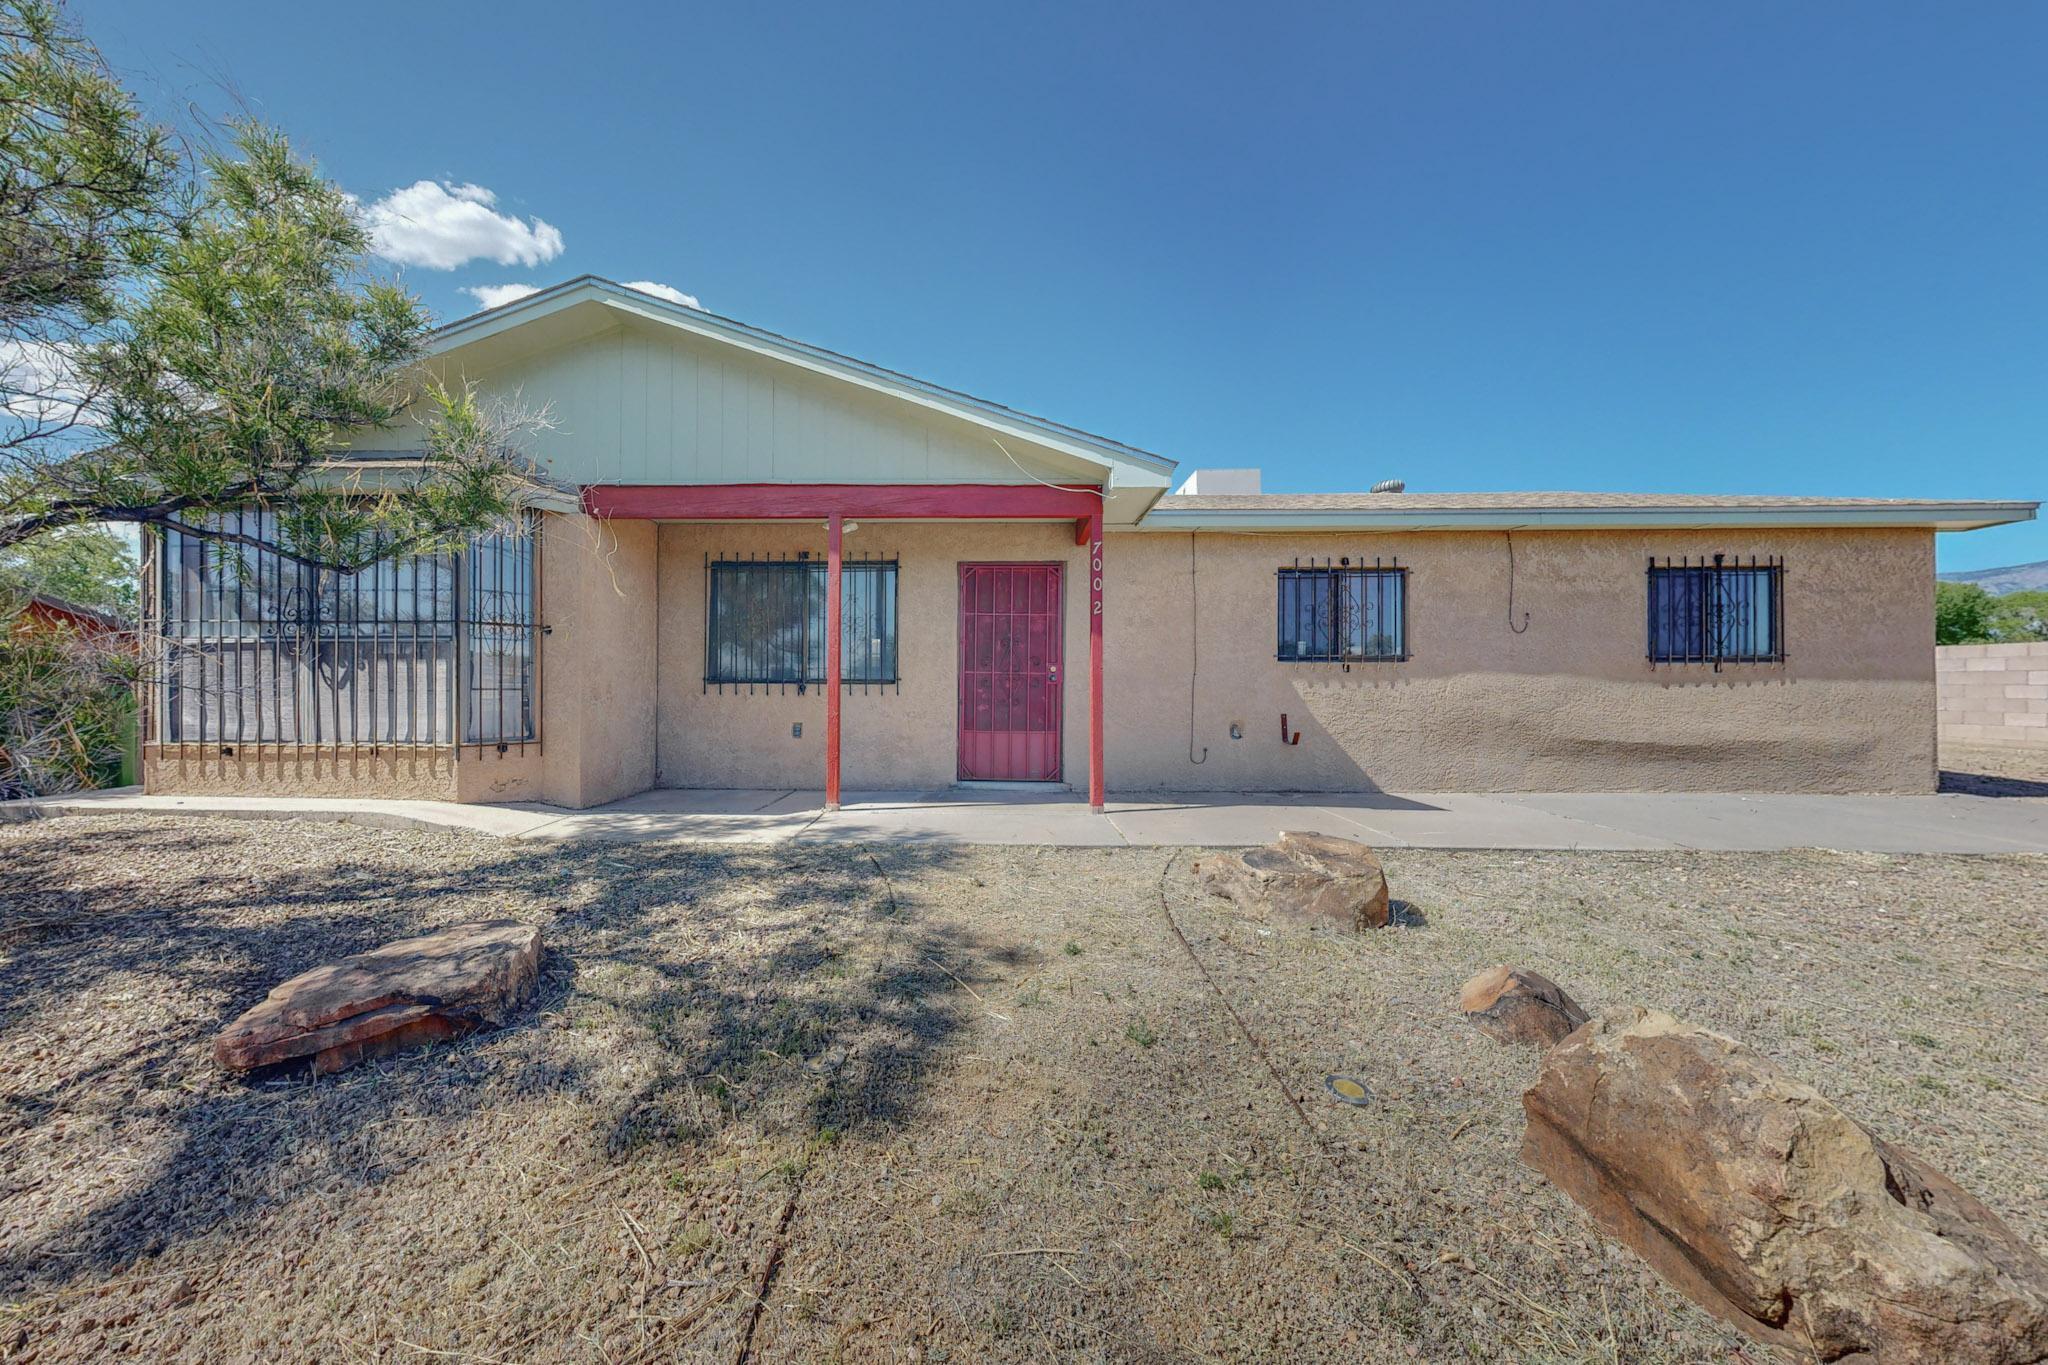 Welcome to your next investment opportunity located in the North Valley! Situated on a large .53, fully fenced lot with 3 bedrooms & 2 baths, this property offers the perfect canvas for your vision. ***Structural issues. Please see report attached in MLS***